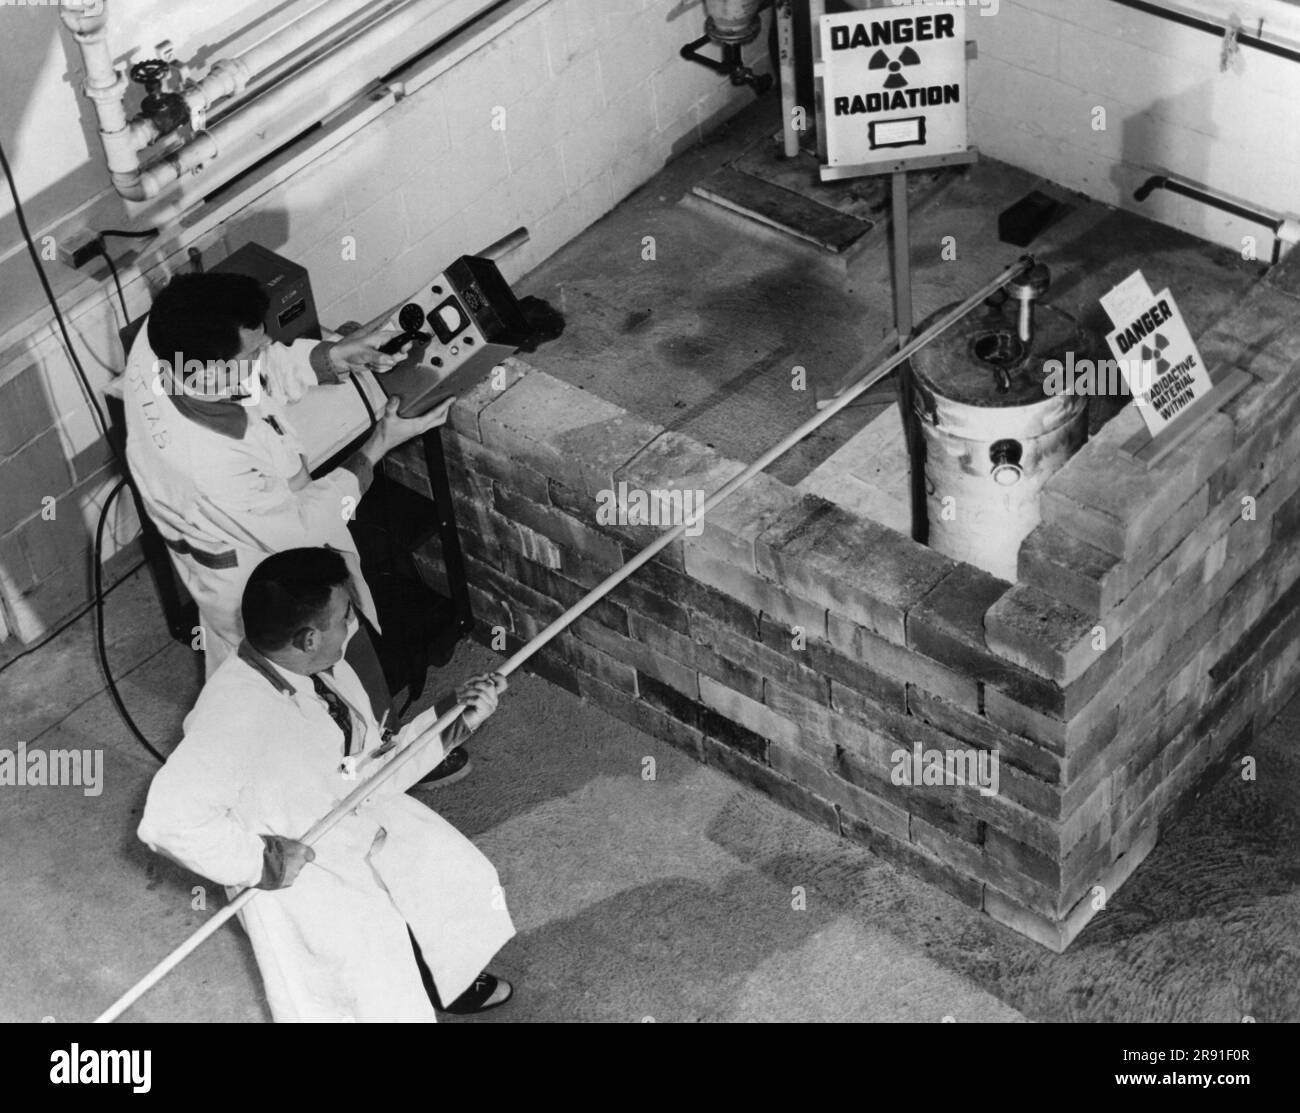 Upton, New York,  March, 1952 A technician at Brookhaven National Laboratory on Long Island stands behind a brick wall as he uses a long steel pole to remove the plug from a one and one-half ton lead shield containing radioactive tantalum while a health physicist uses a survey meter containing a Geiger Counter to make sure personnel are not exposed to dangerous amounts of radiation. Stock Photo